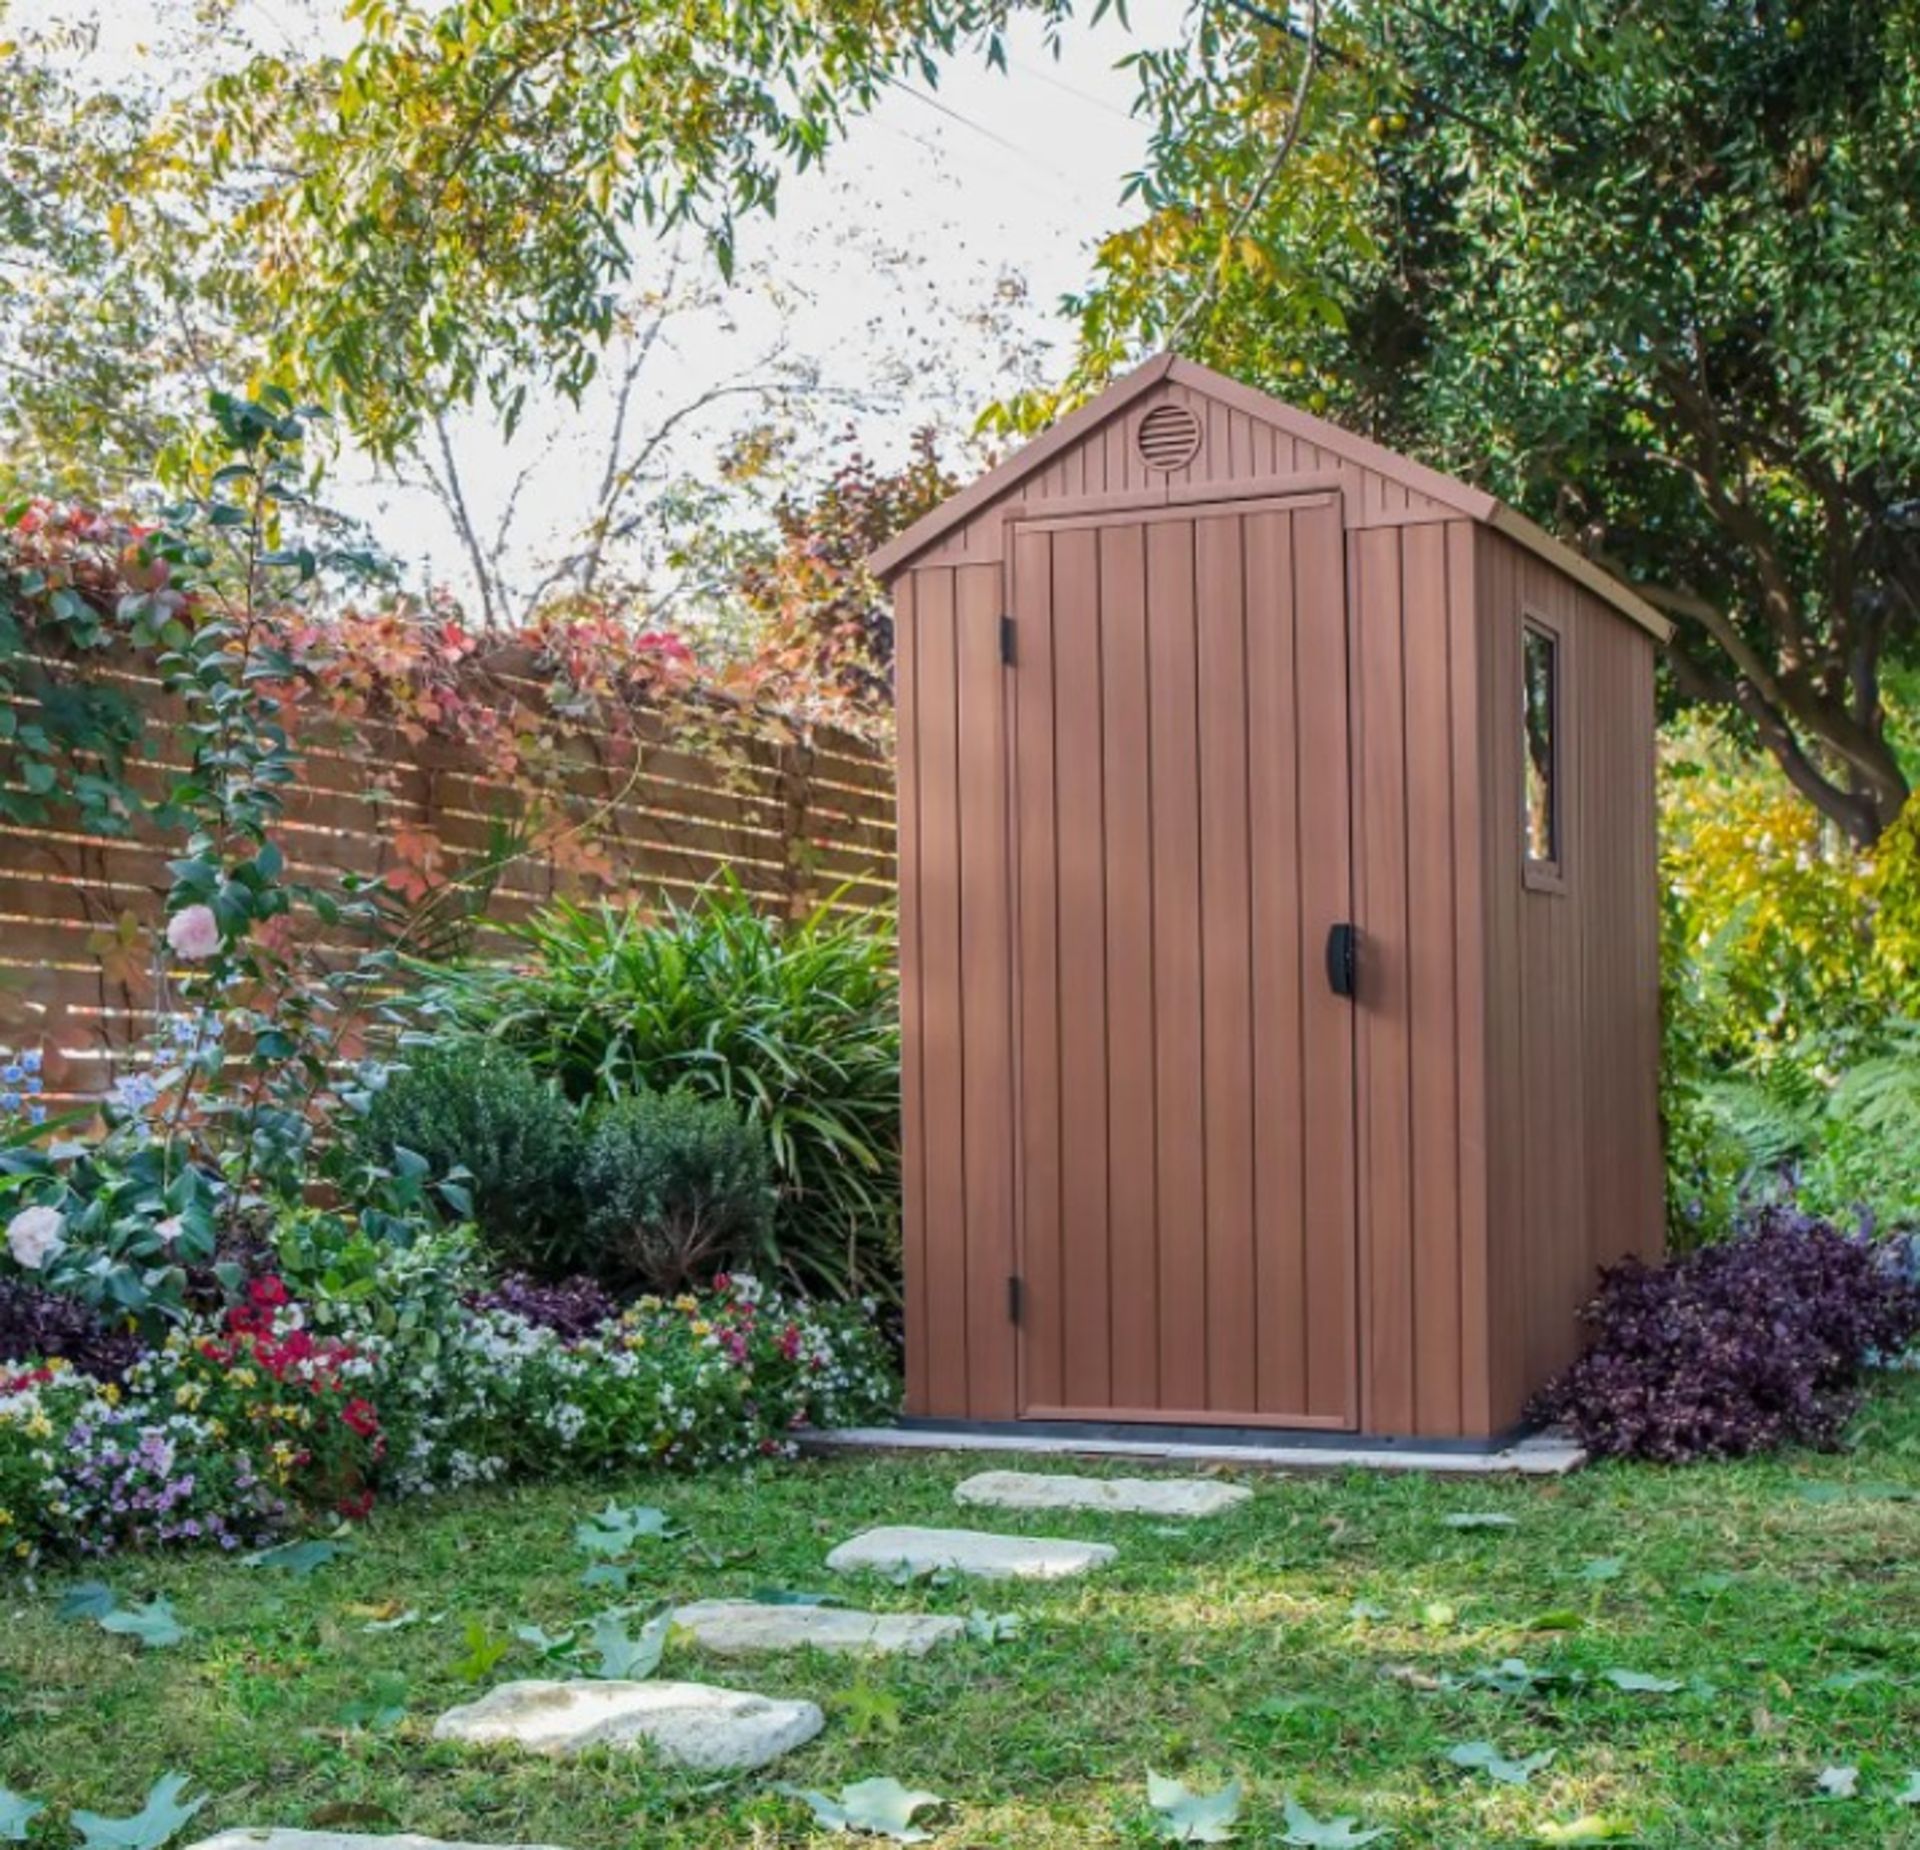 (P13) 1x Keter Darwin Outdoor Apex Shed 4x6 RRP £365. (W112x D176.5x H199.8cm). Unit Has No Packag